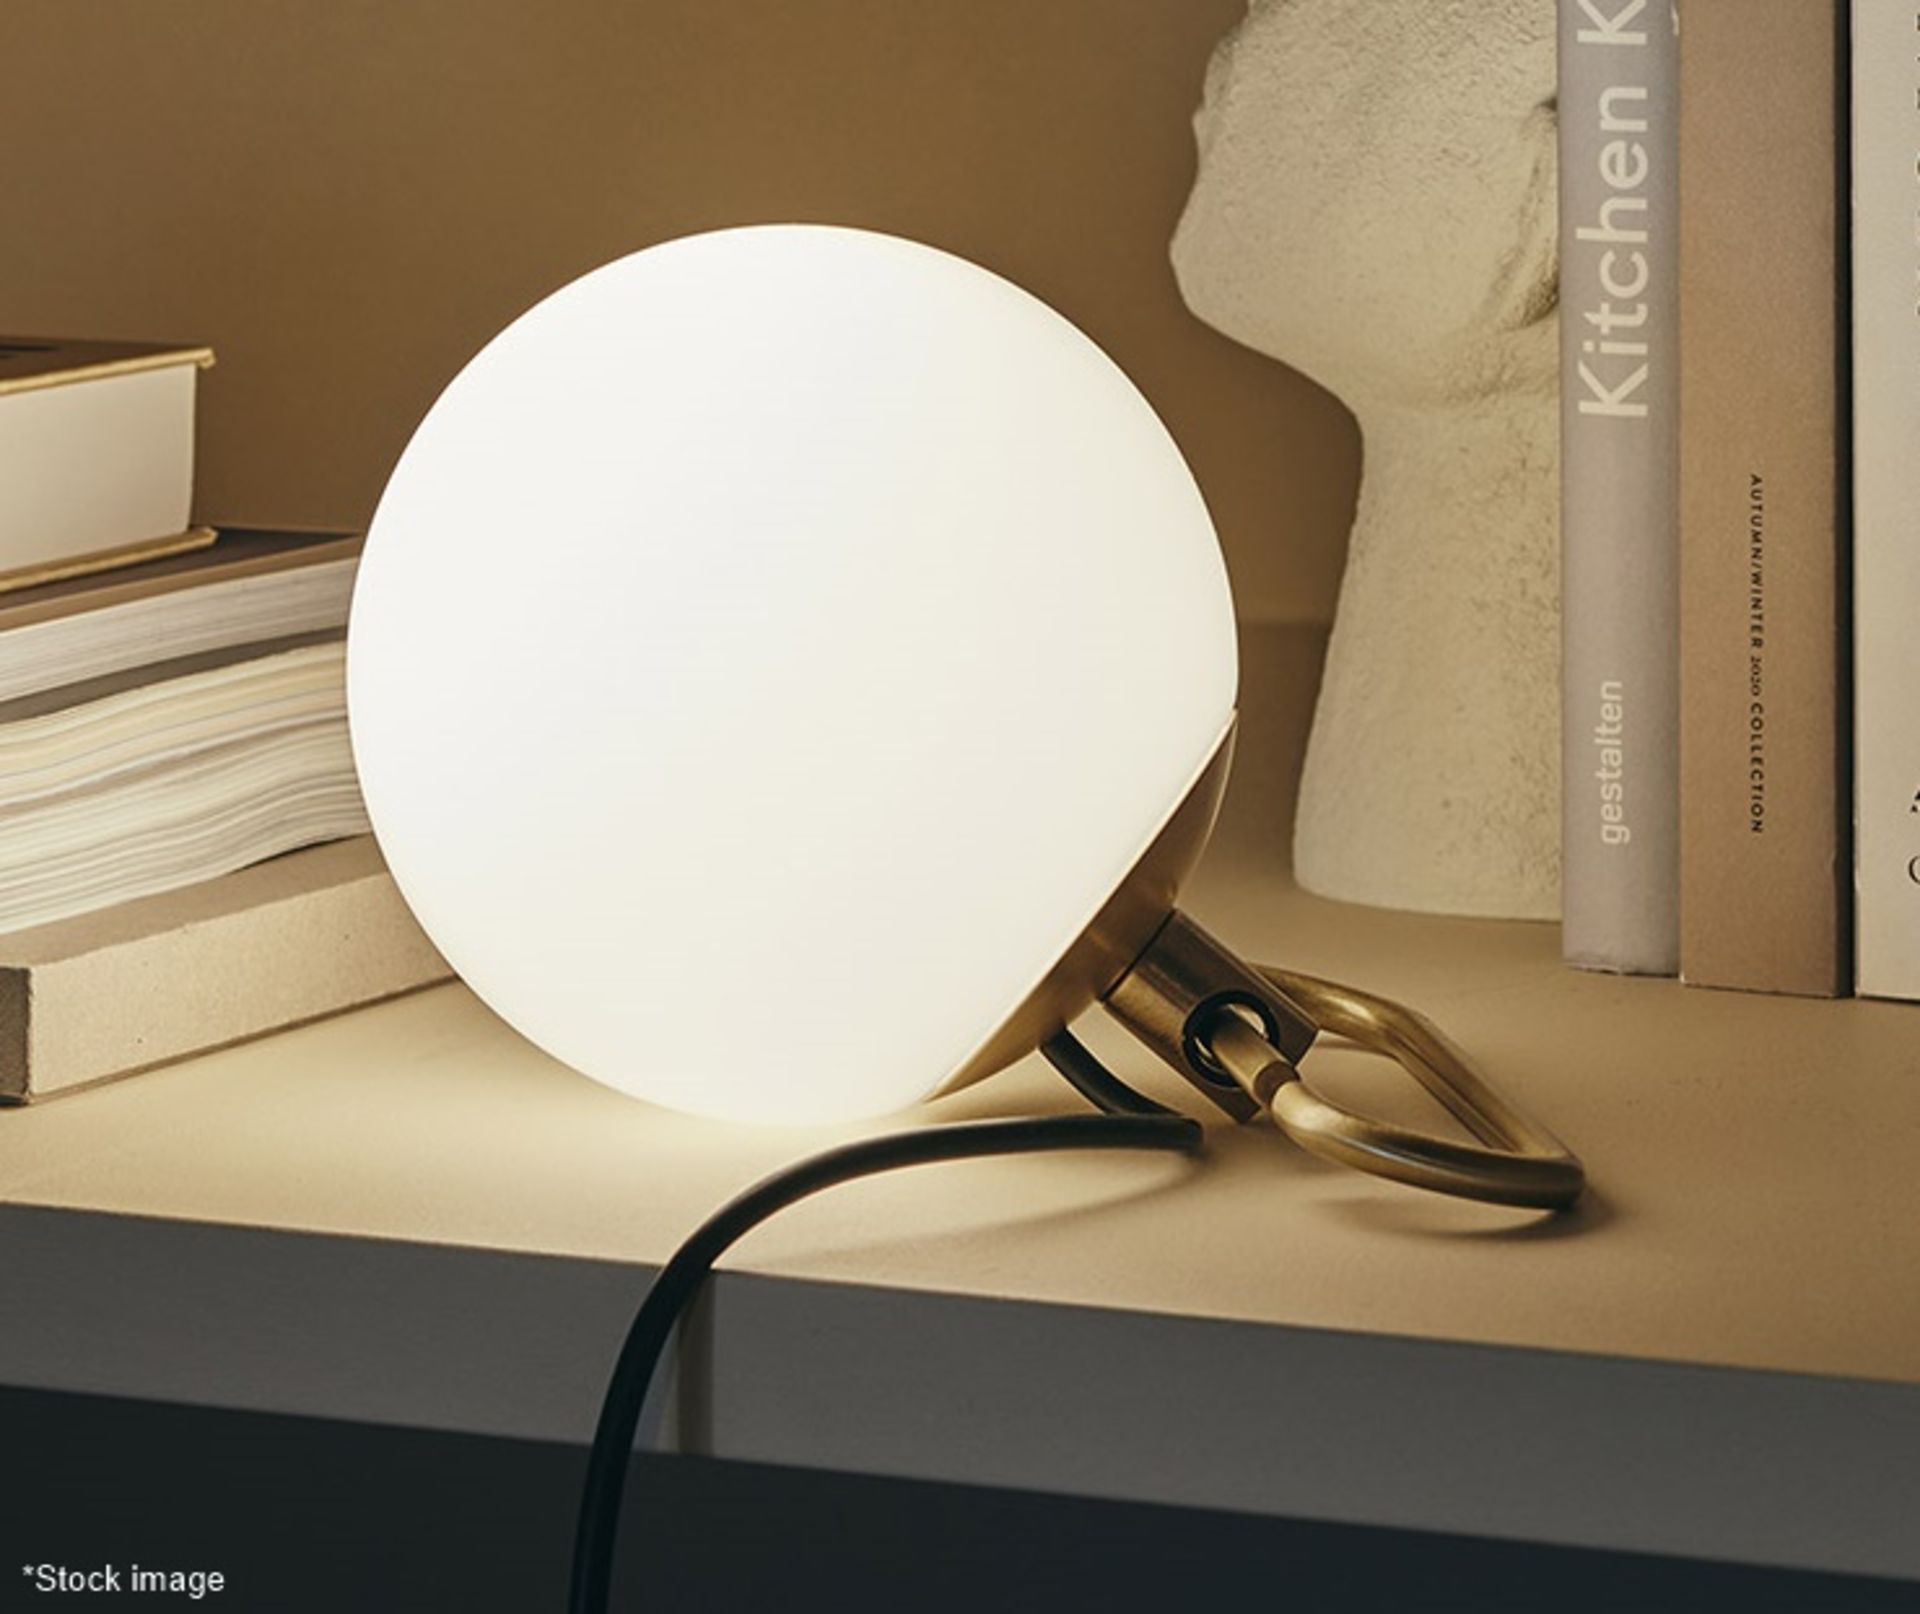 1 x ARTEMIDE 'NH1217' Designer Table Lamp With Blown Glass Diffuser - Original RRP £208.00 - Sealed - Image 3 of 5